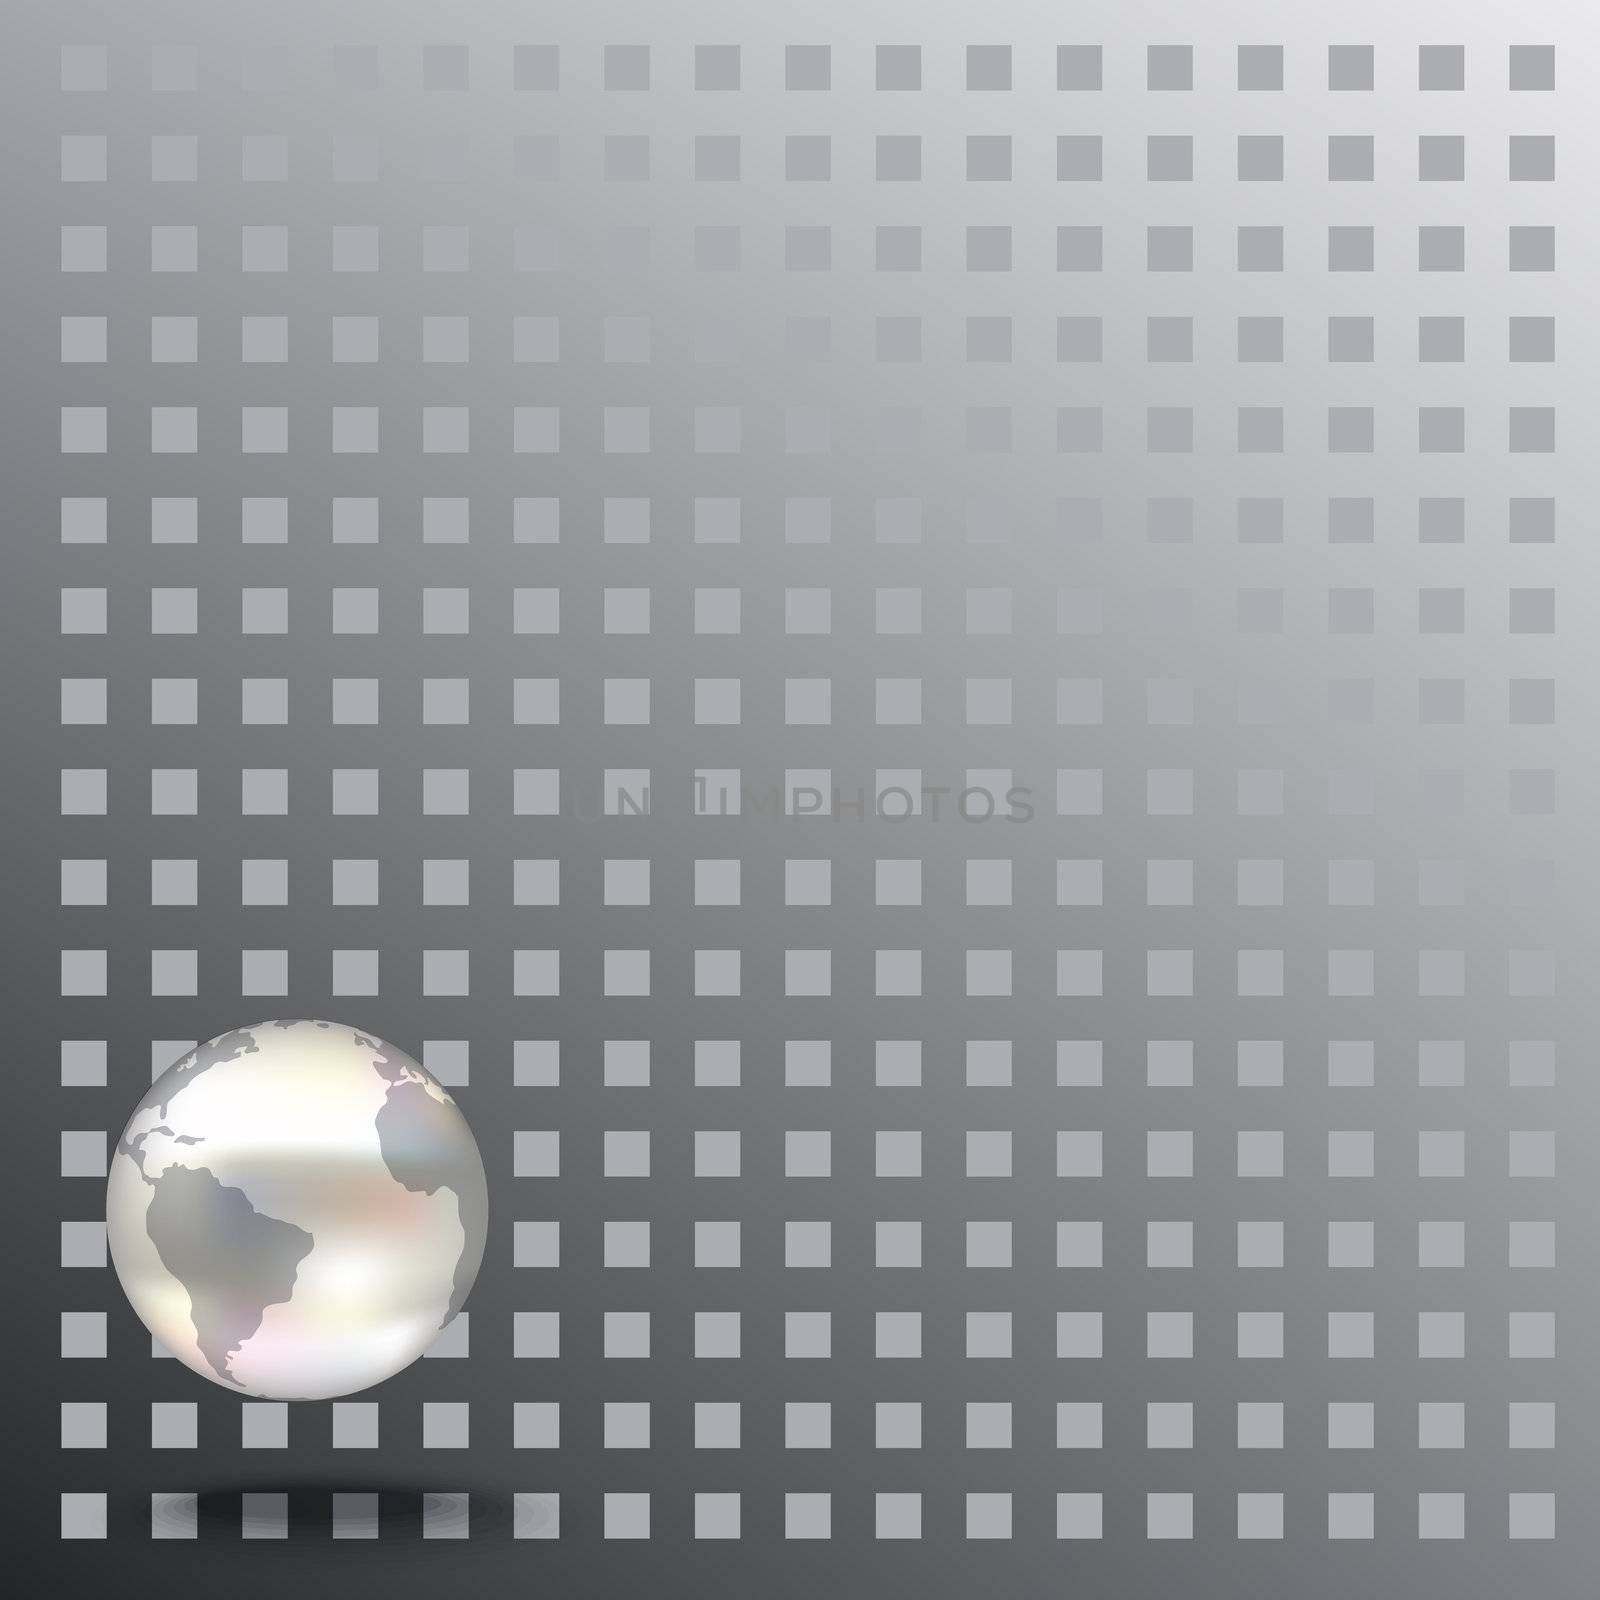 Abstract dark background with globe on grey